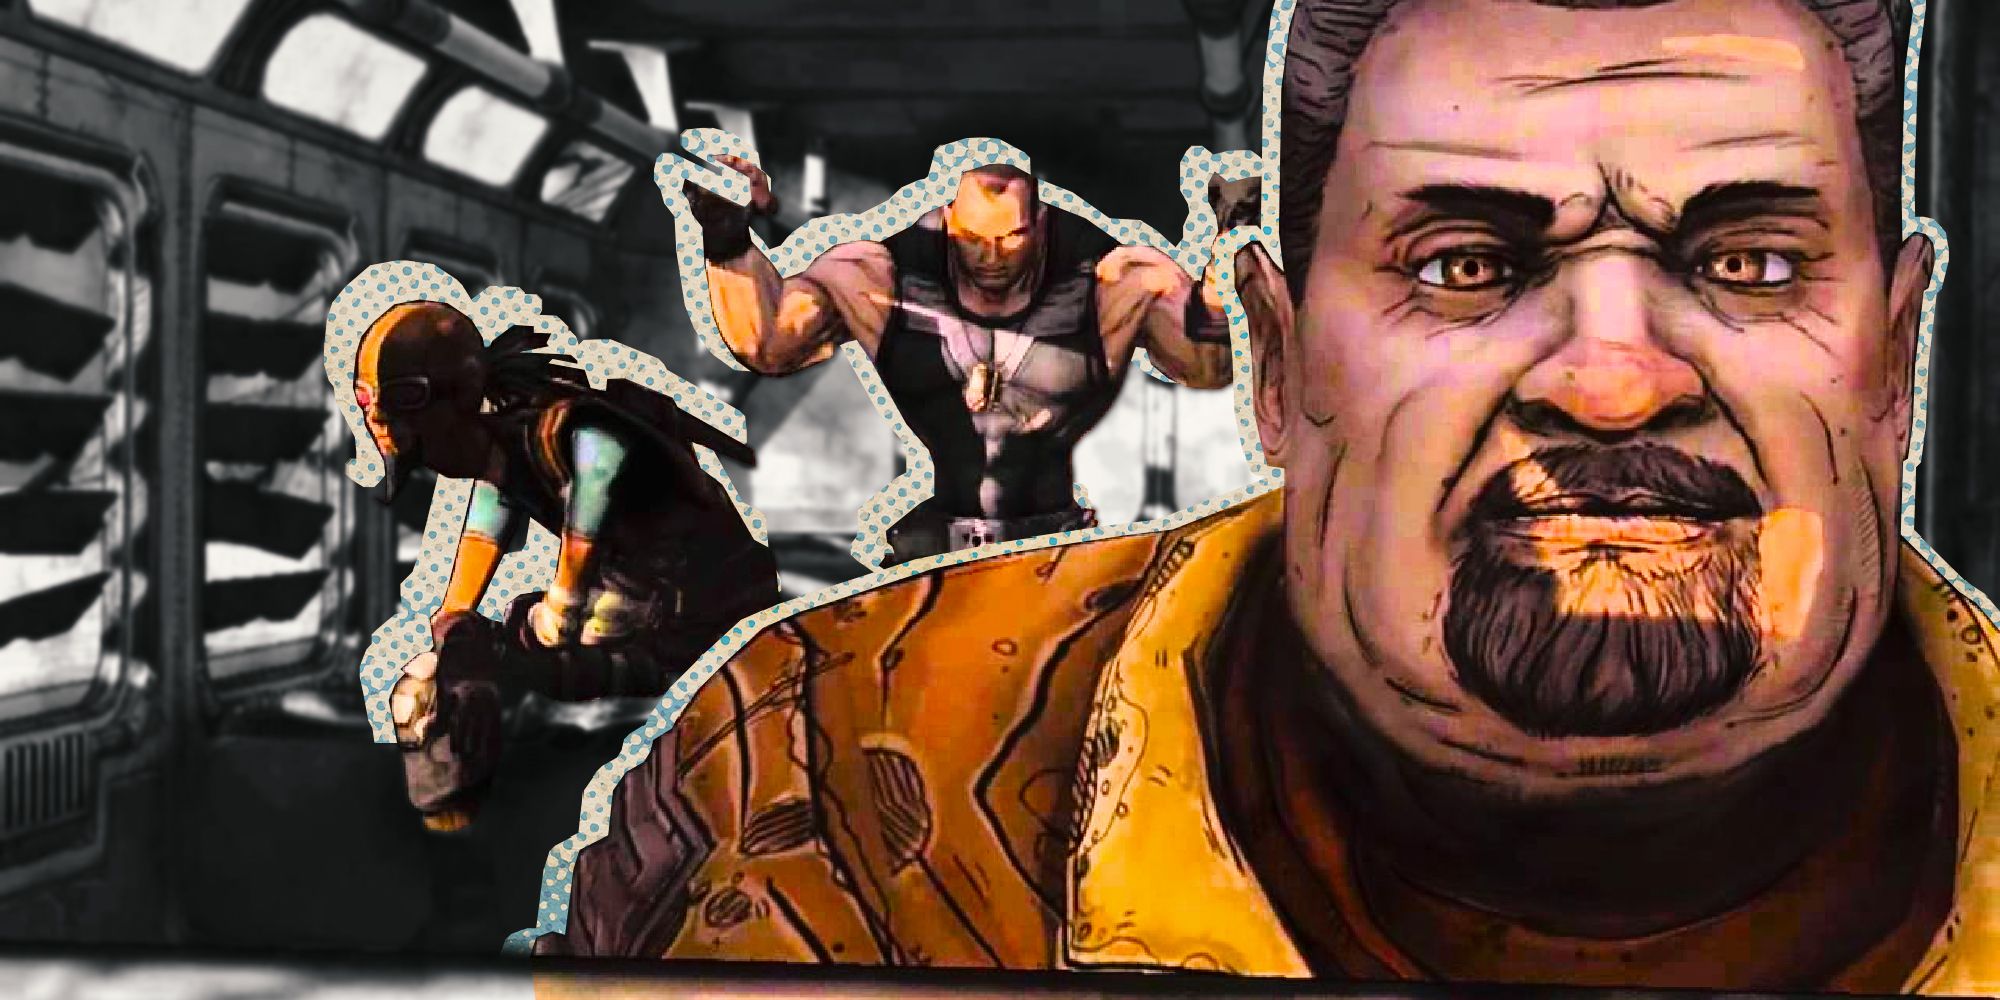 Borderlands Intro with the characters riding the bus and Marcus looking at the camera